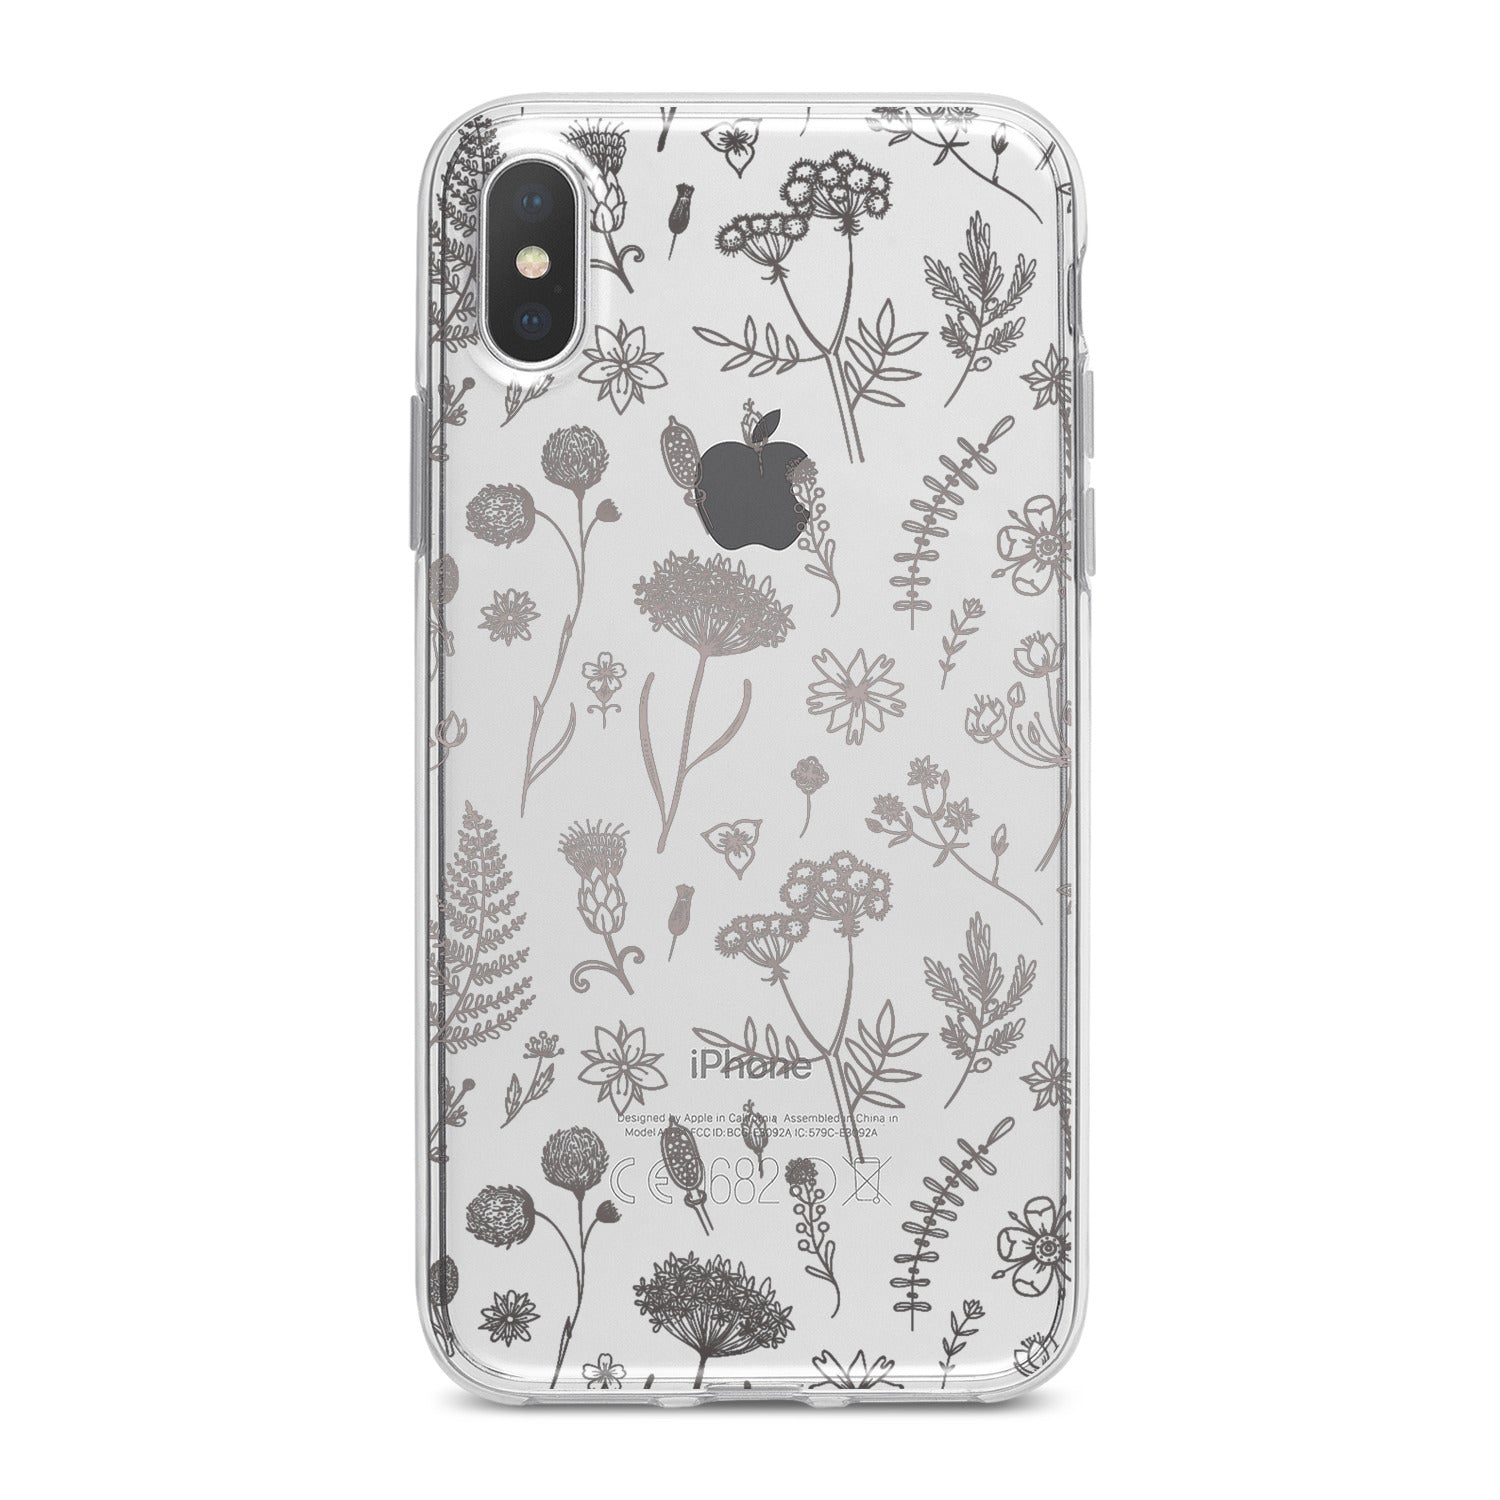 Lex Altern Cute Wildflowers Phone Case for your iPhone & Android phone.